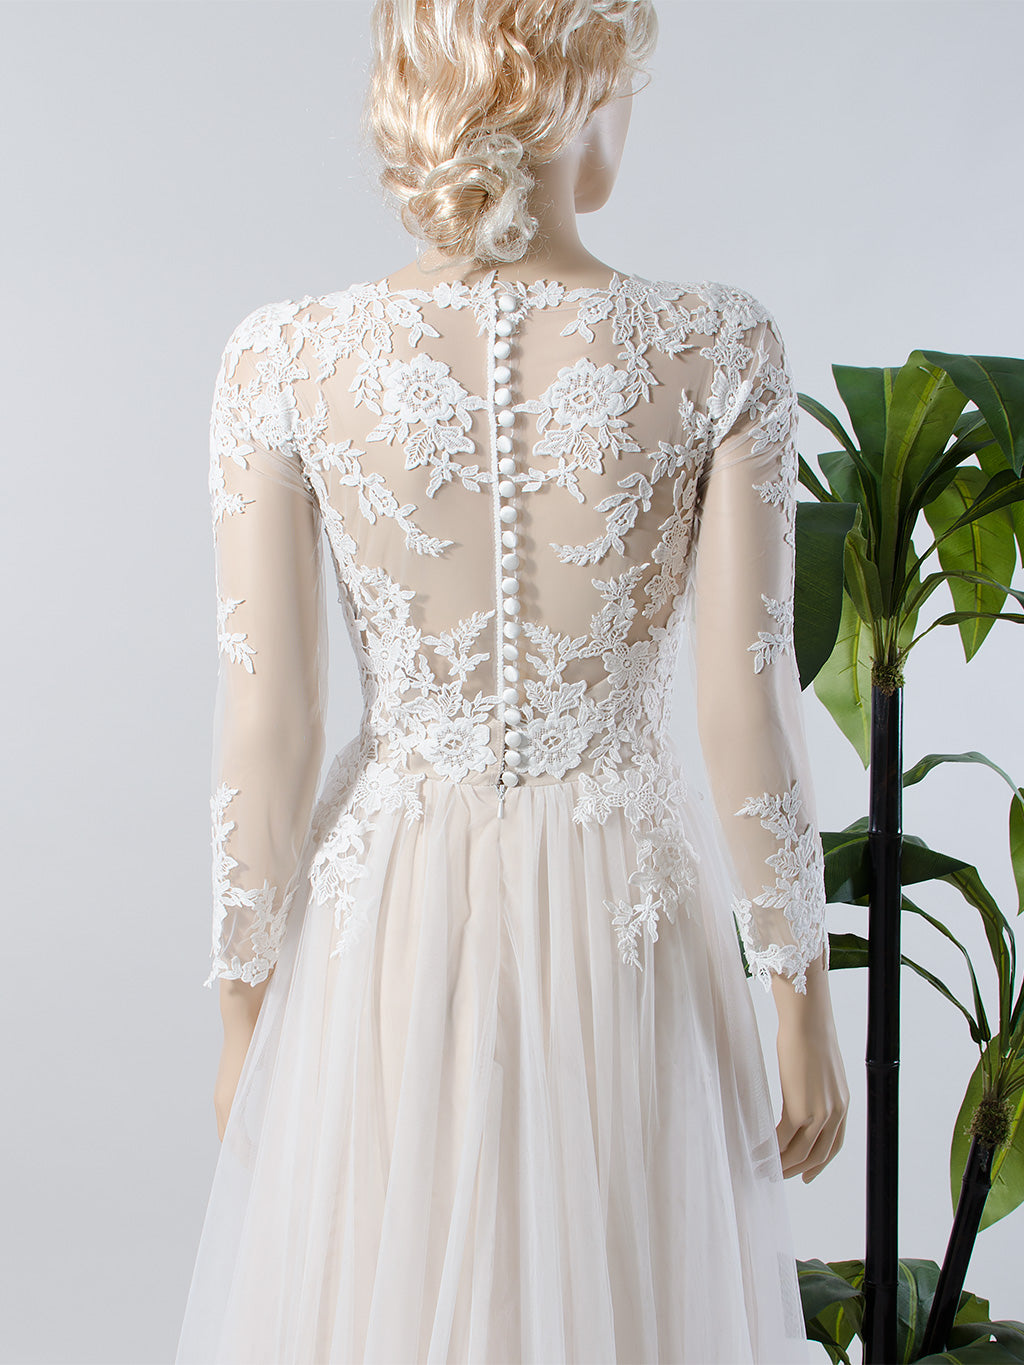 adding lace sleeves to wedding dress